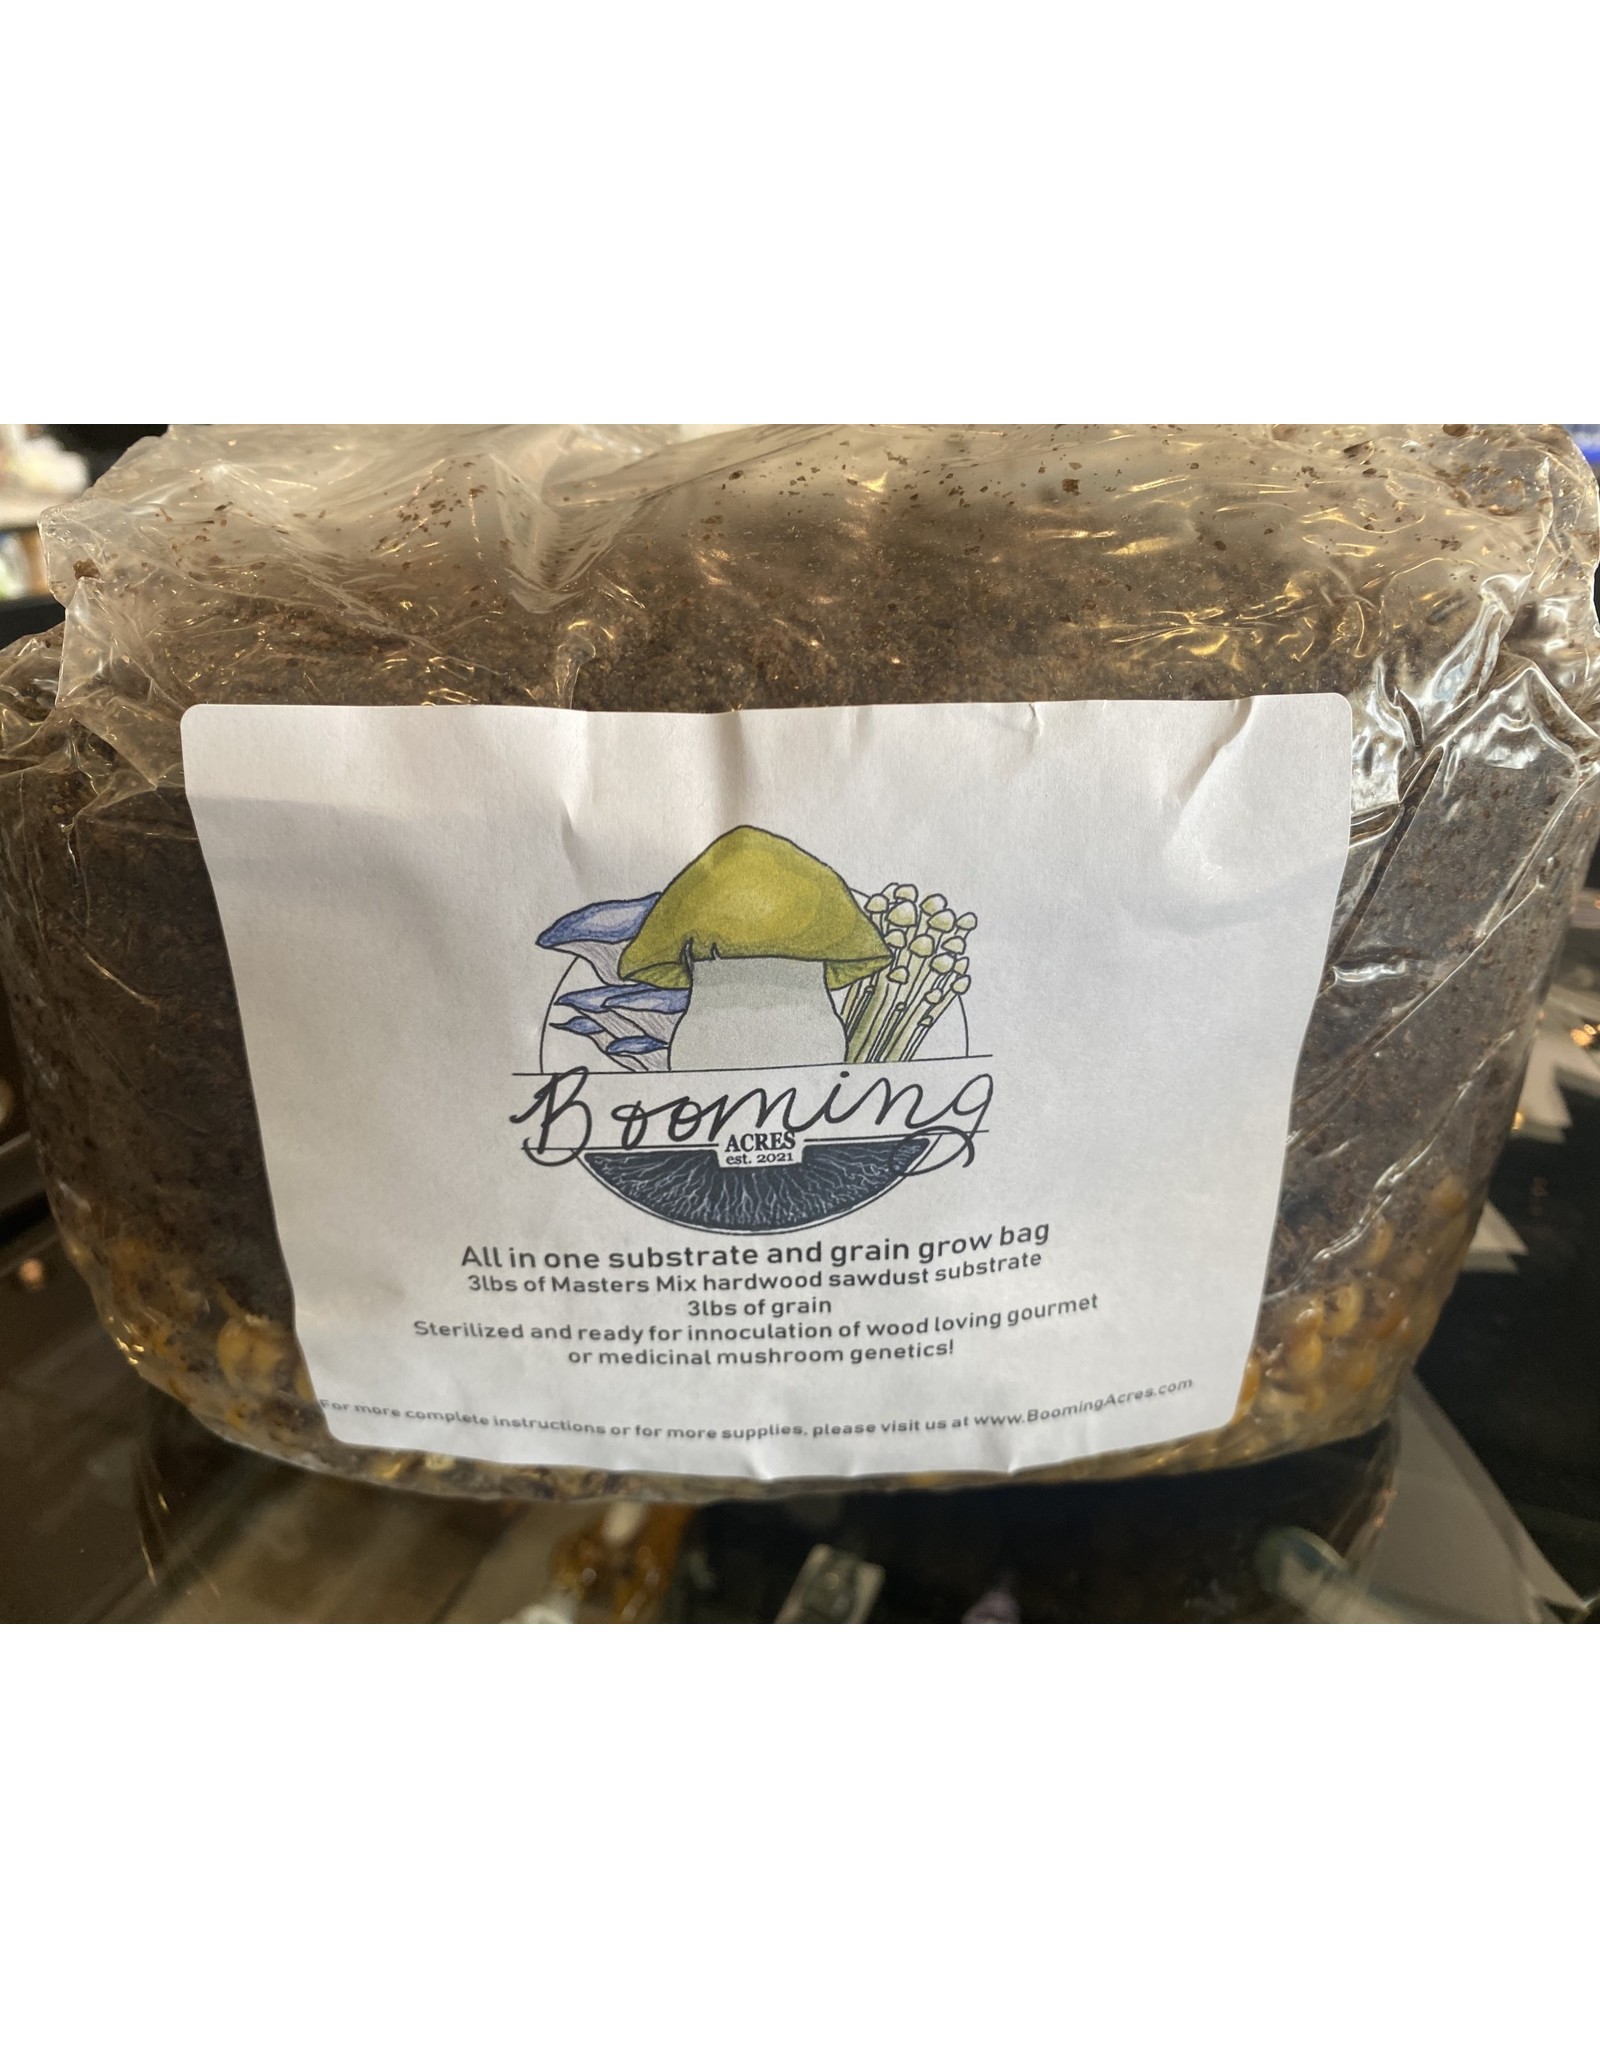 Booming Acres Magical Booming Acres 5lb All in One Mushroom Growing Bag with Grain and Hardwood Sawdust - in box